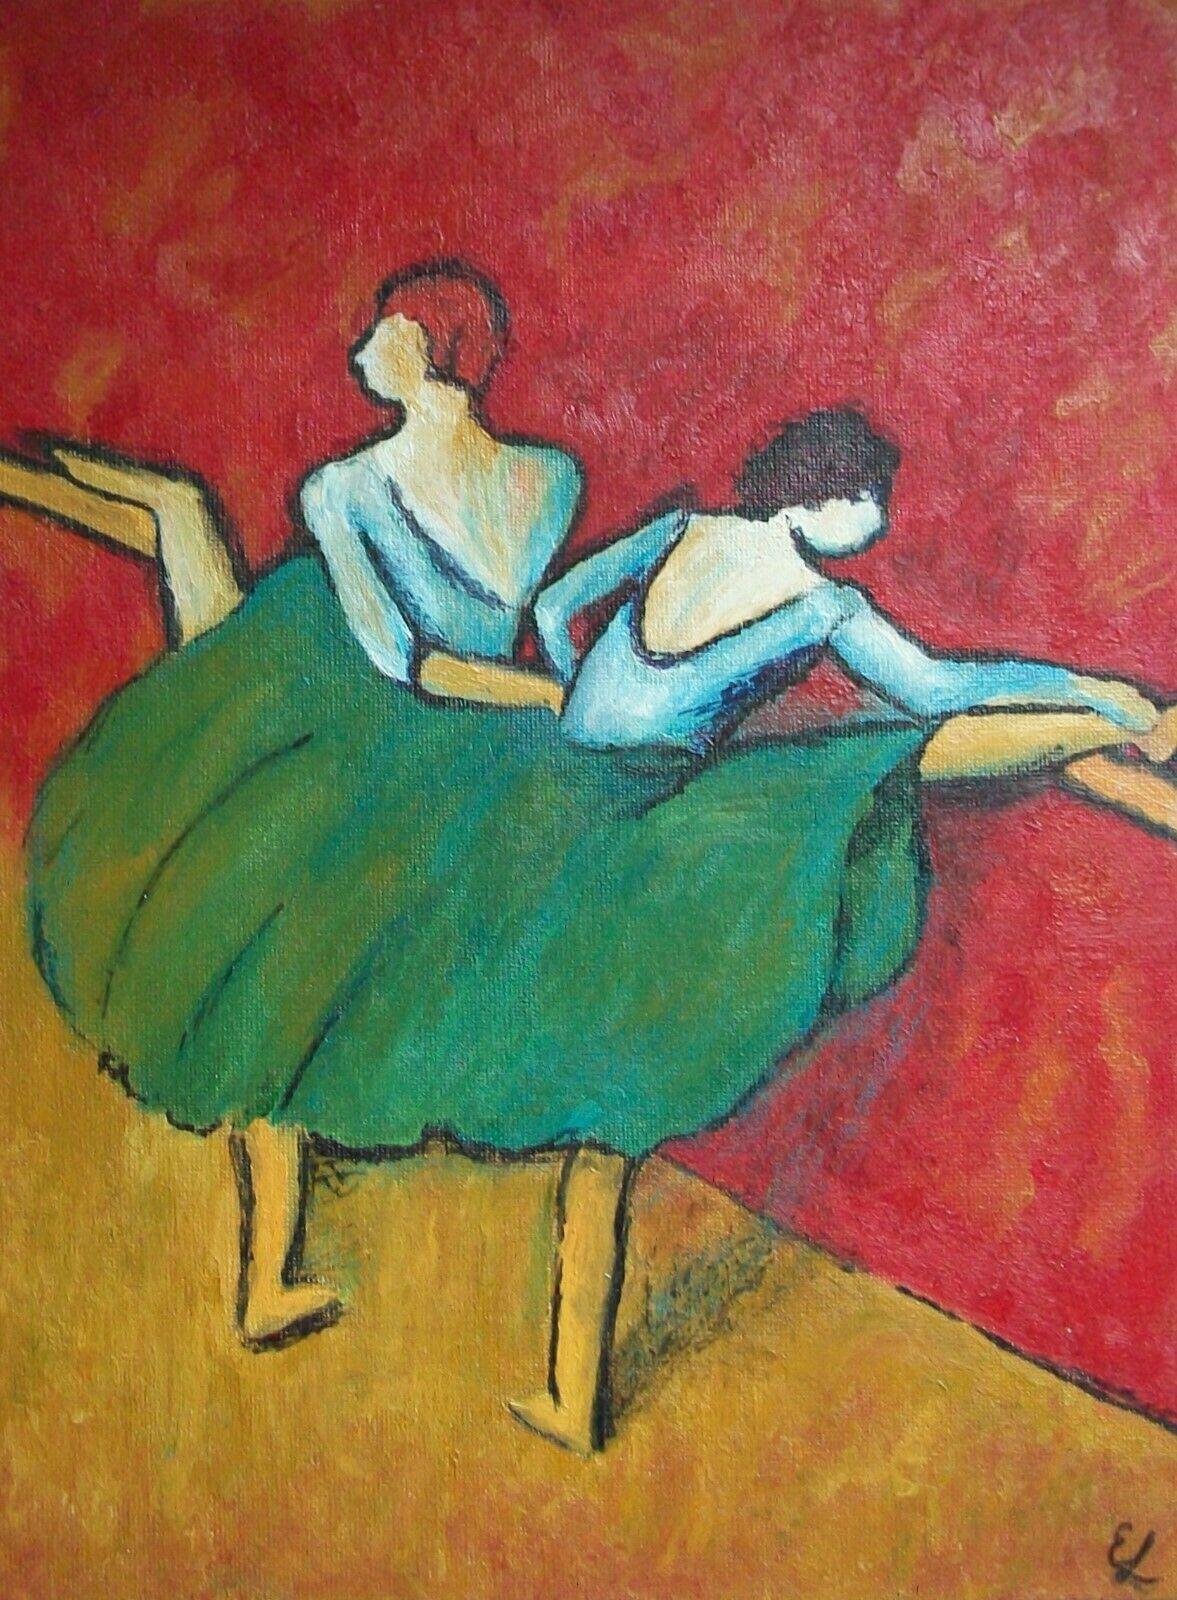 ERNEST LINDNER A.R.C.A. (1897-1988) - 'Untitled' - Modernist figurative oil painting on artist's canvas board - featuring two dancers at a ballet barre - initialled lower right - Canada (Saskatoon, Saskatchewan) - circa 1950.

Excellent/mint